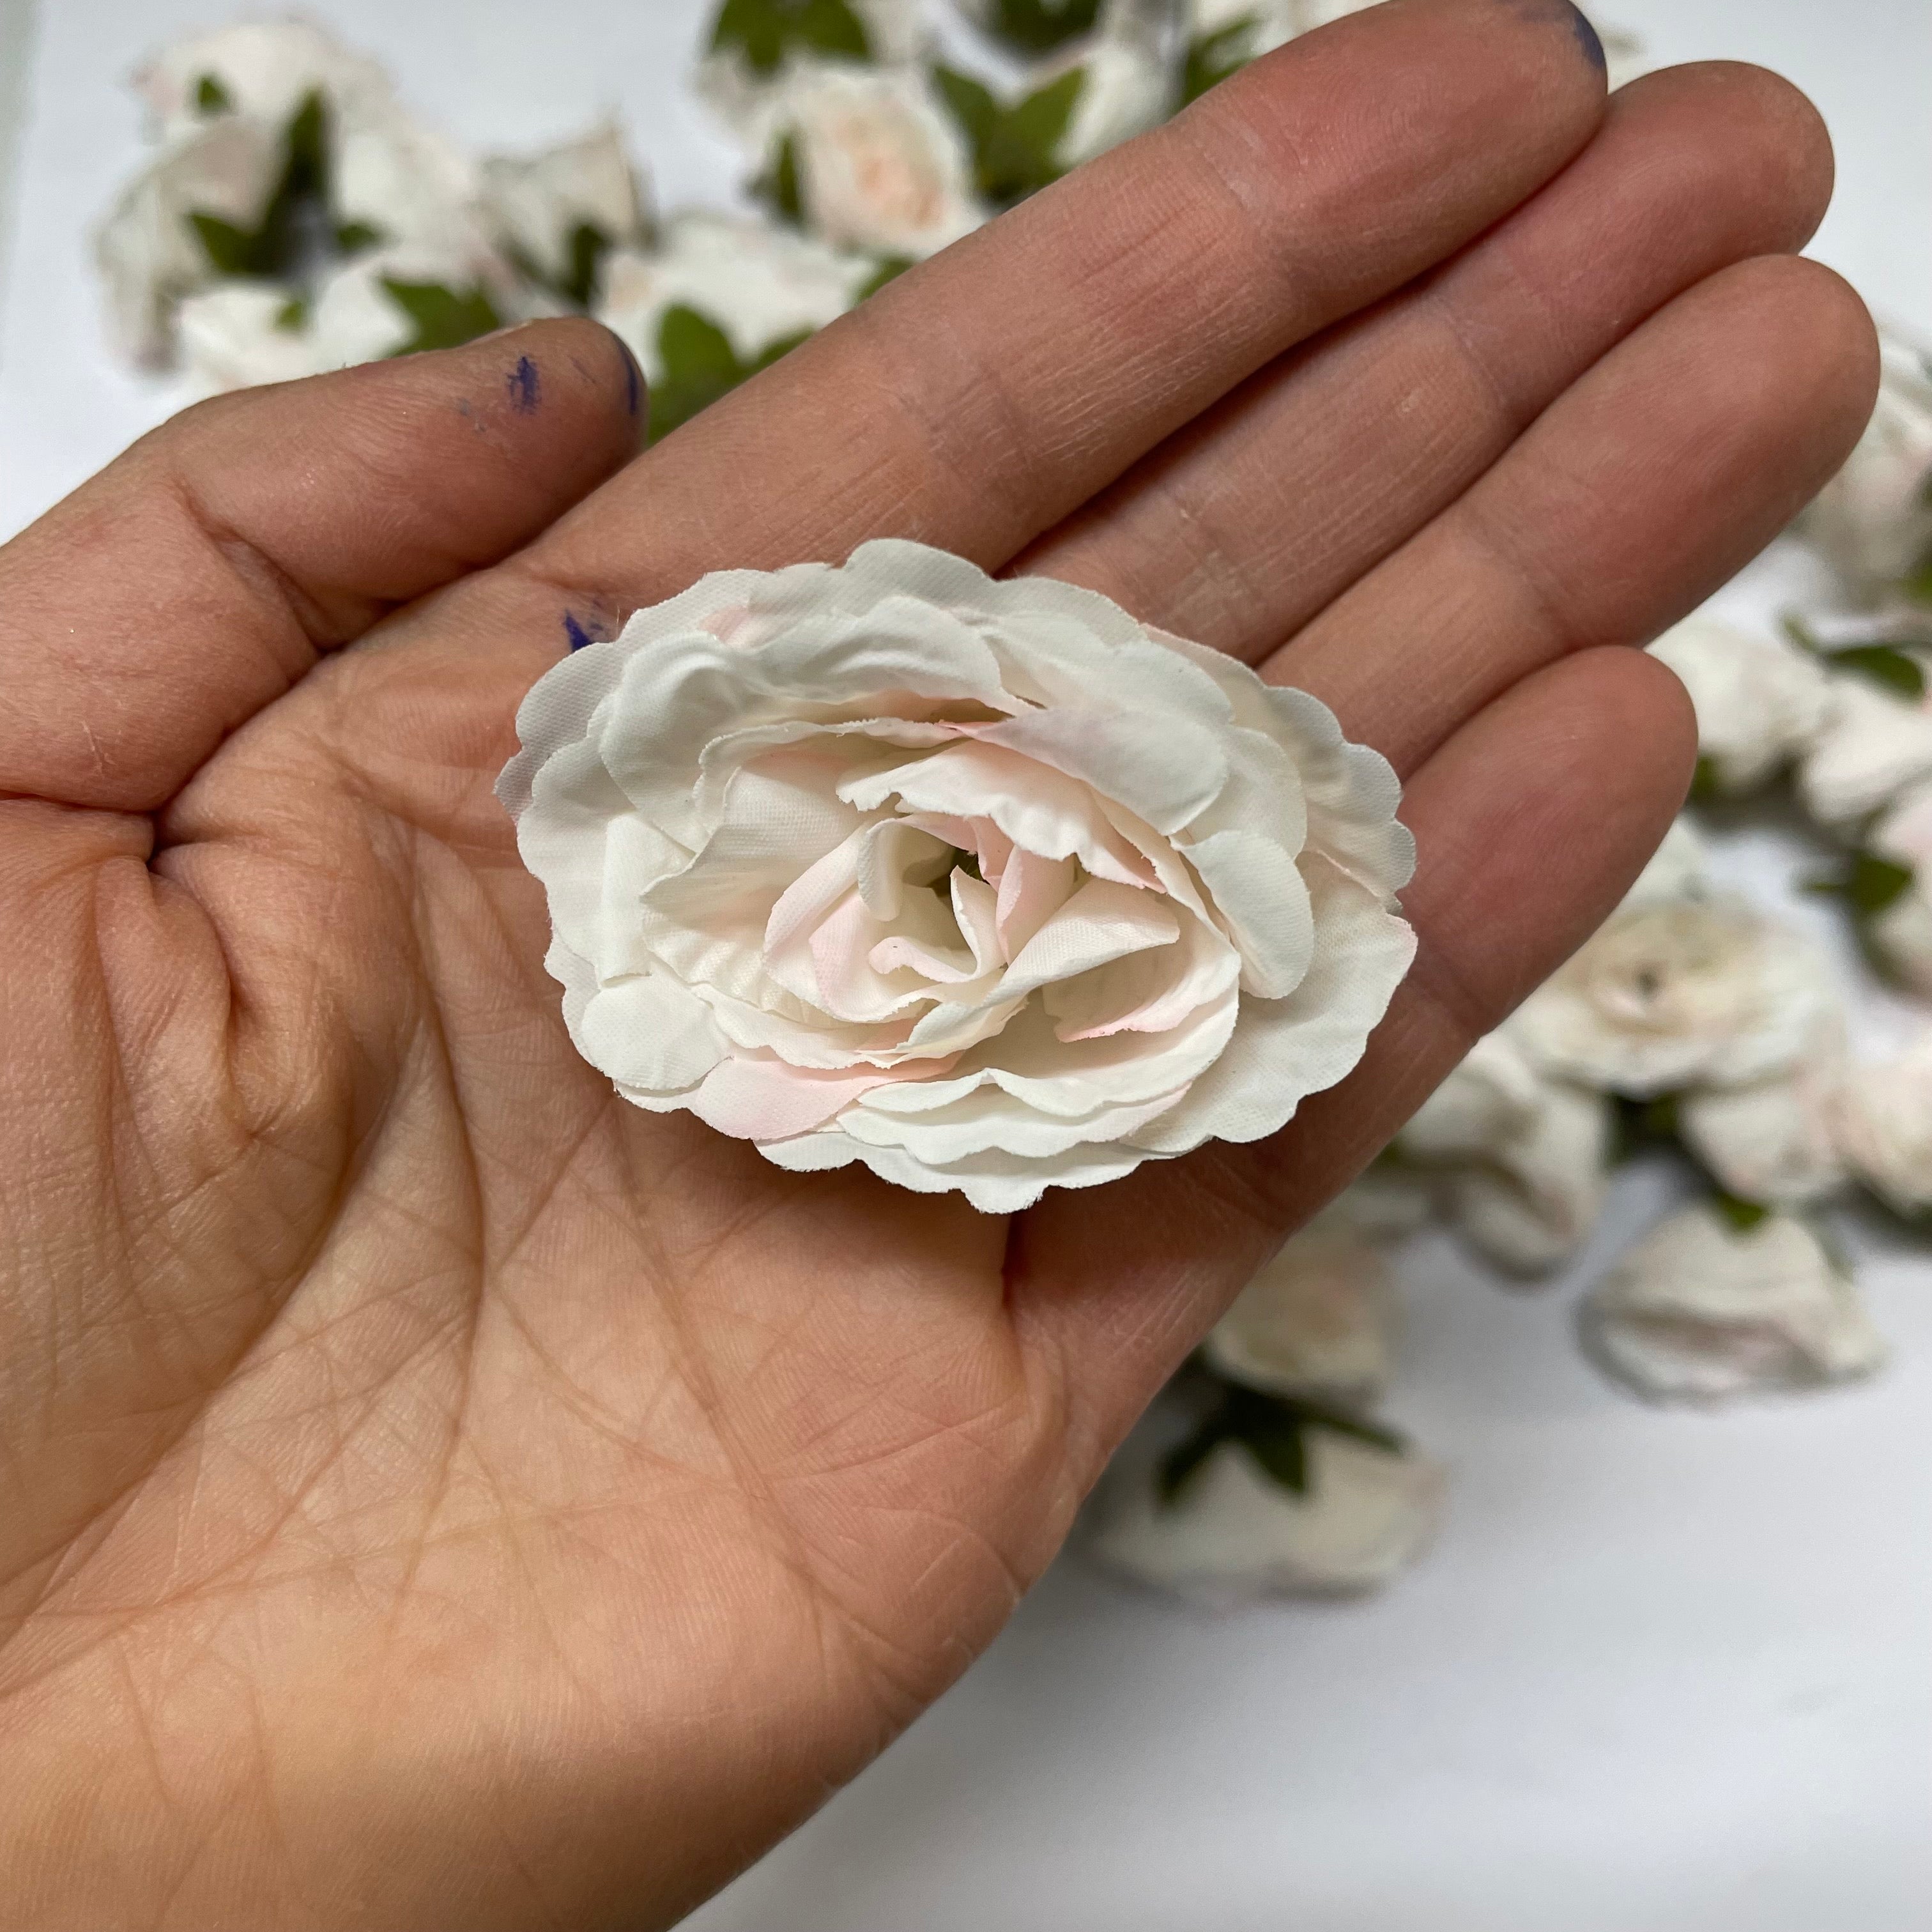 Artificial Silk Flower Heads -Pale Light Pink Rose Style 61 - 5 Pack